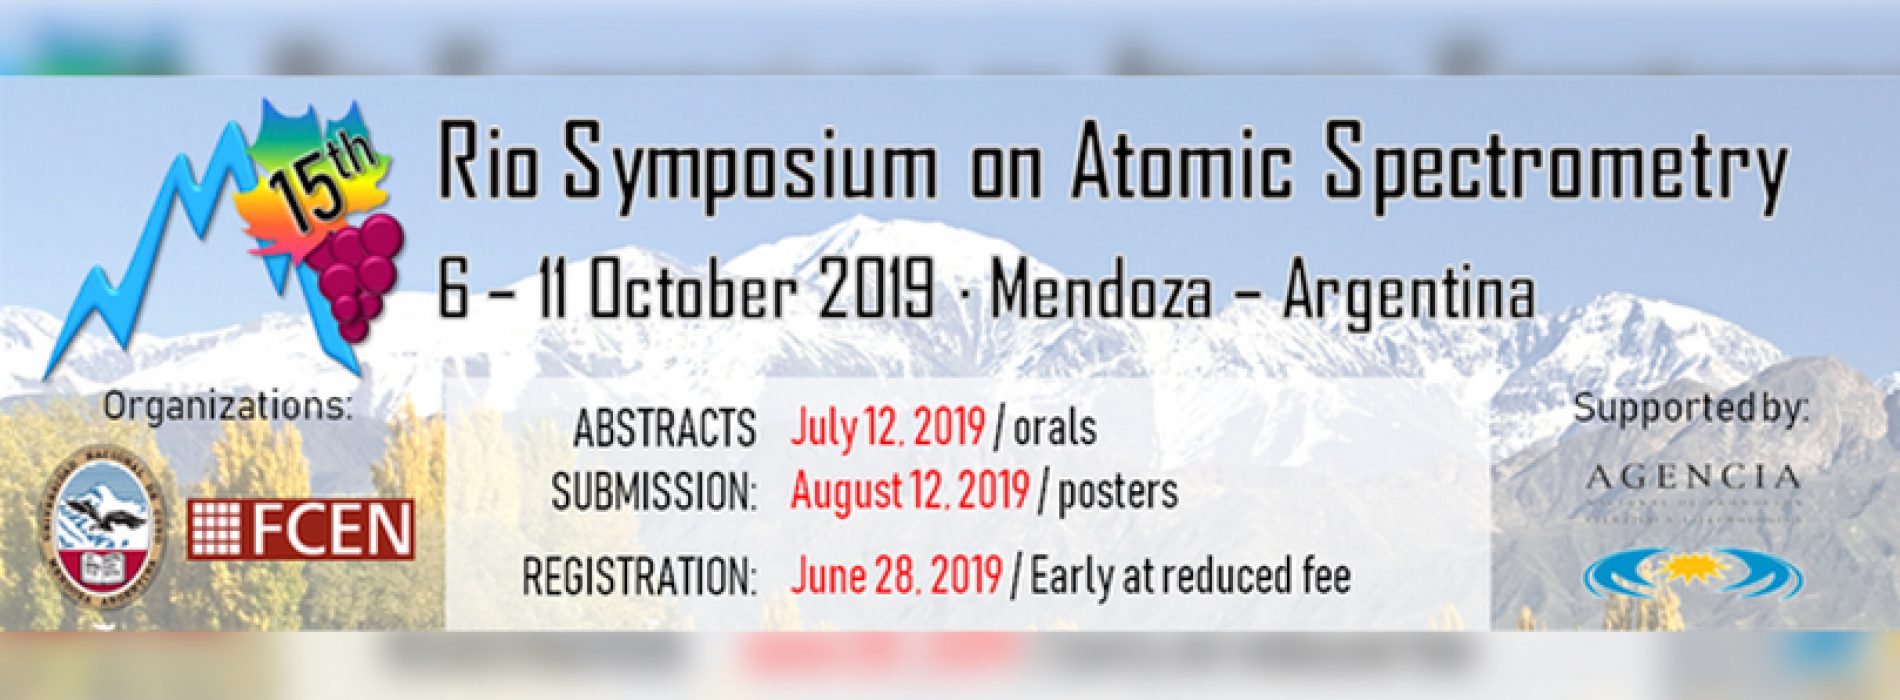 Important awards for poster and oral presentations! – 15th Rio Symposium on Atomic Spectrometry | 6 -11 October 2019 in Mendoza, Argentina